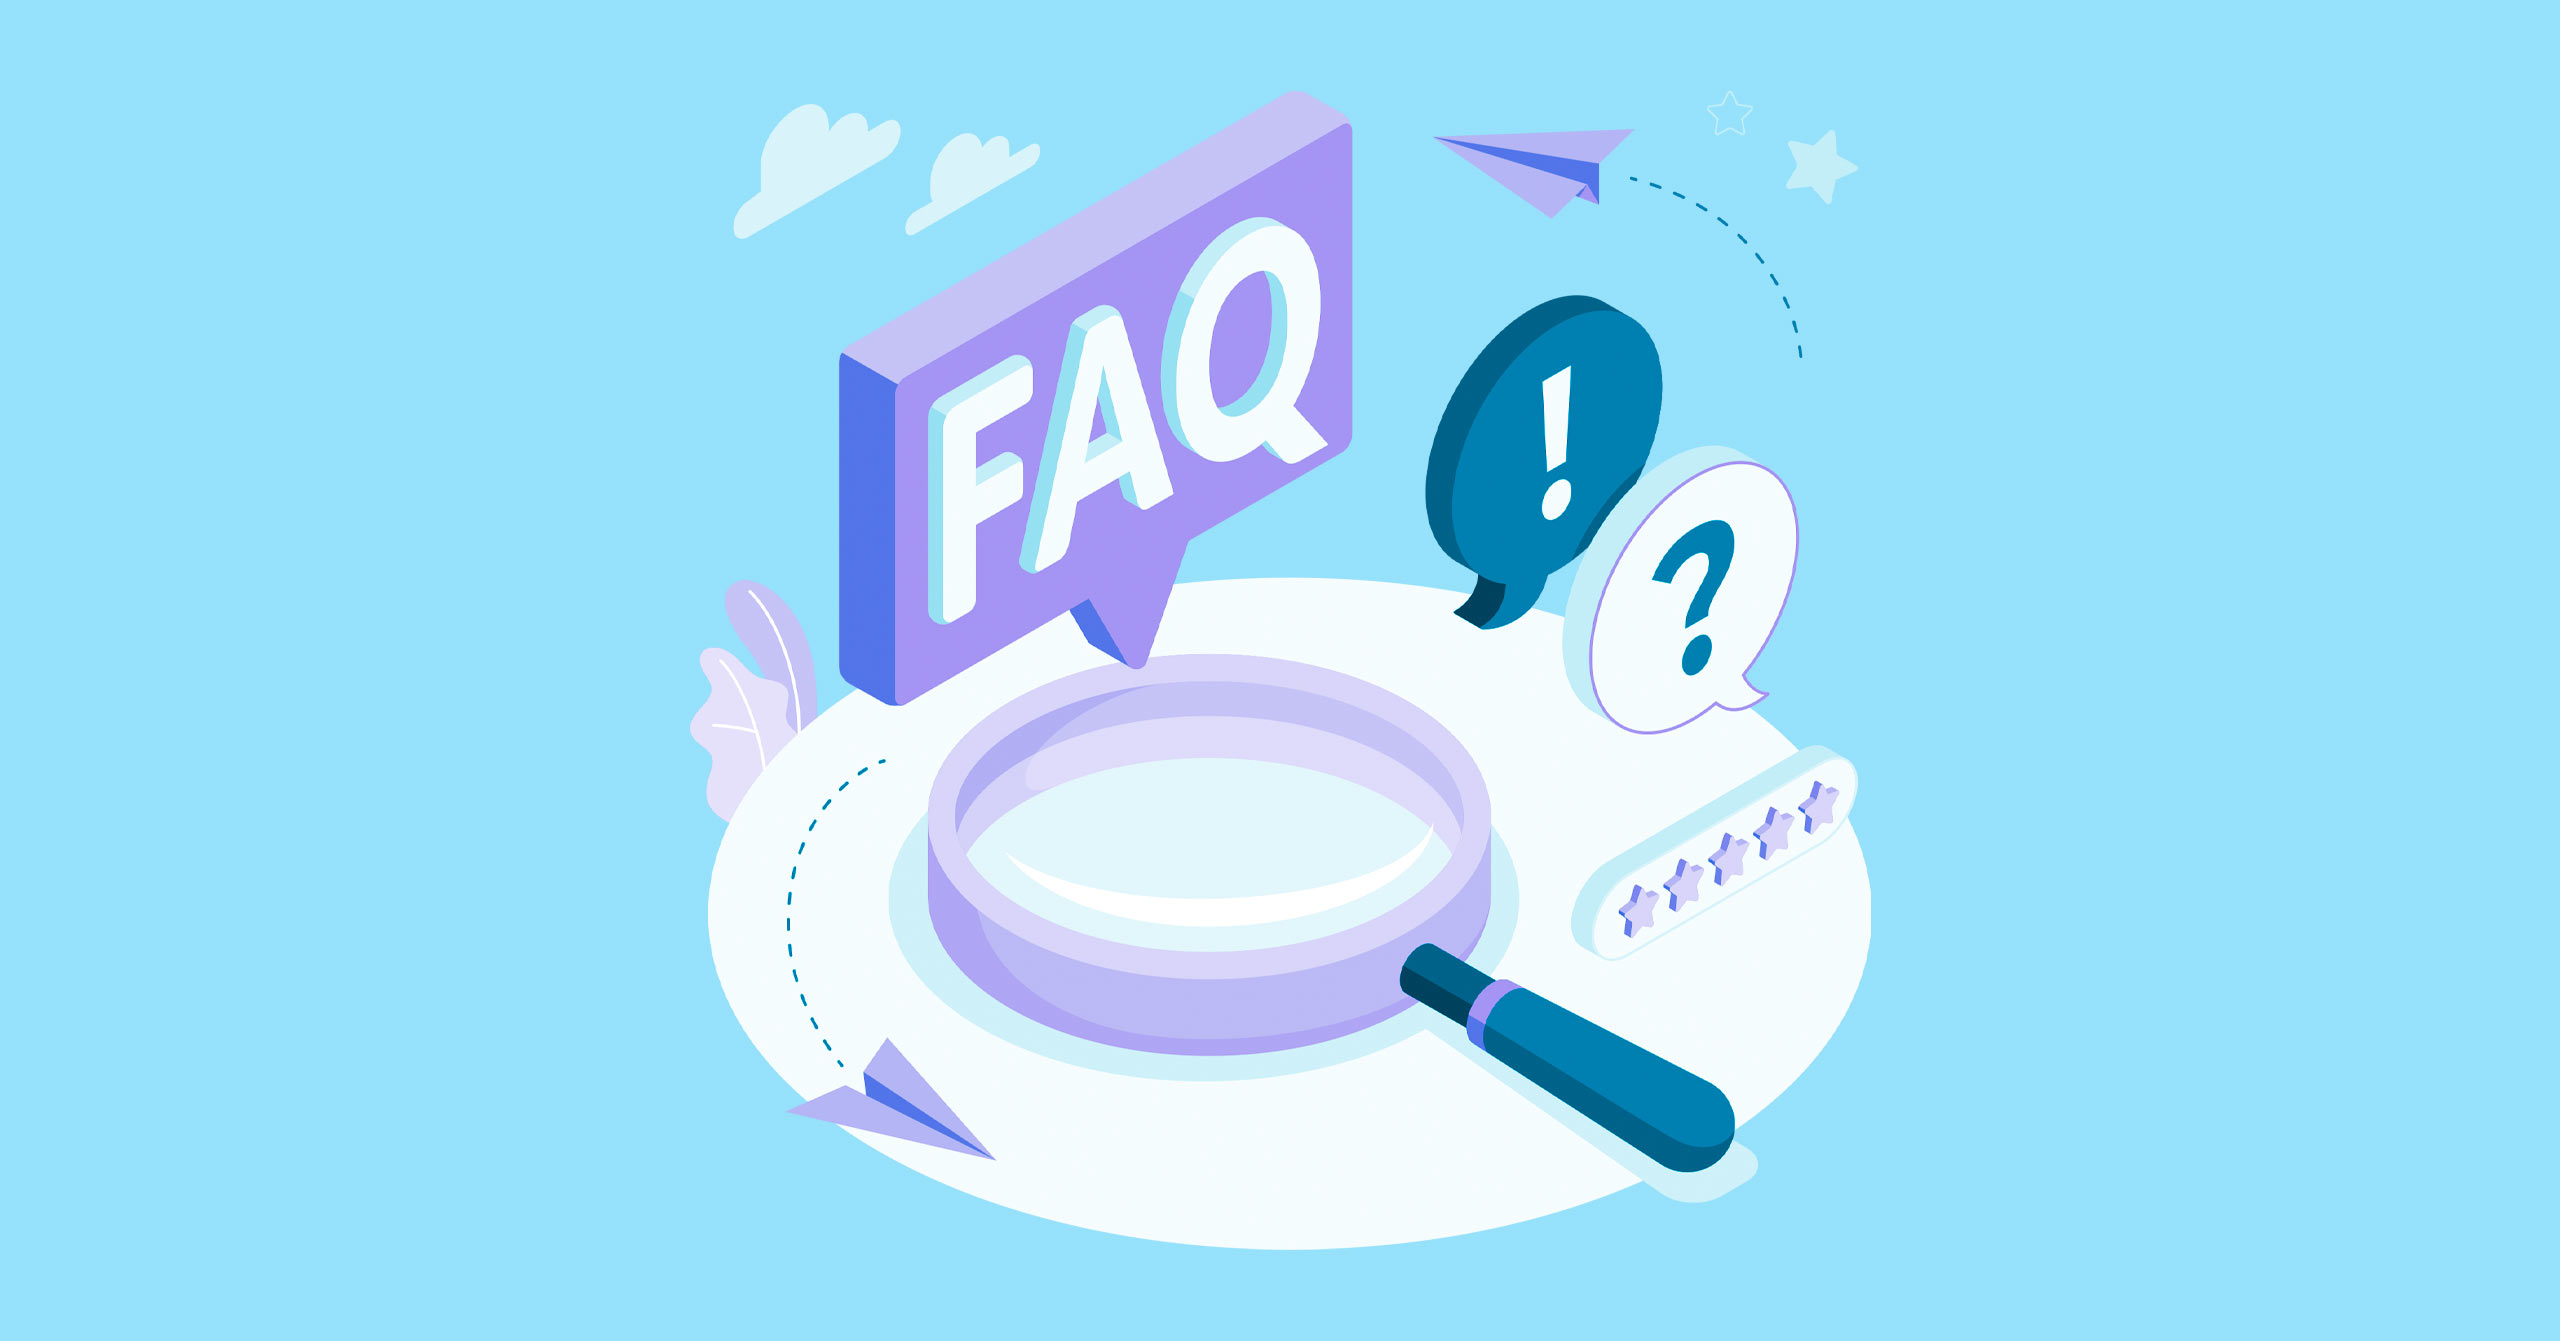 All you need to know about Ping Network (FAQs)